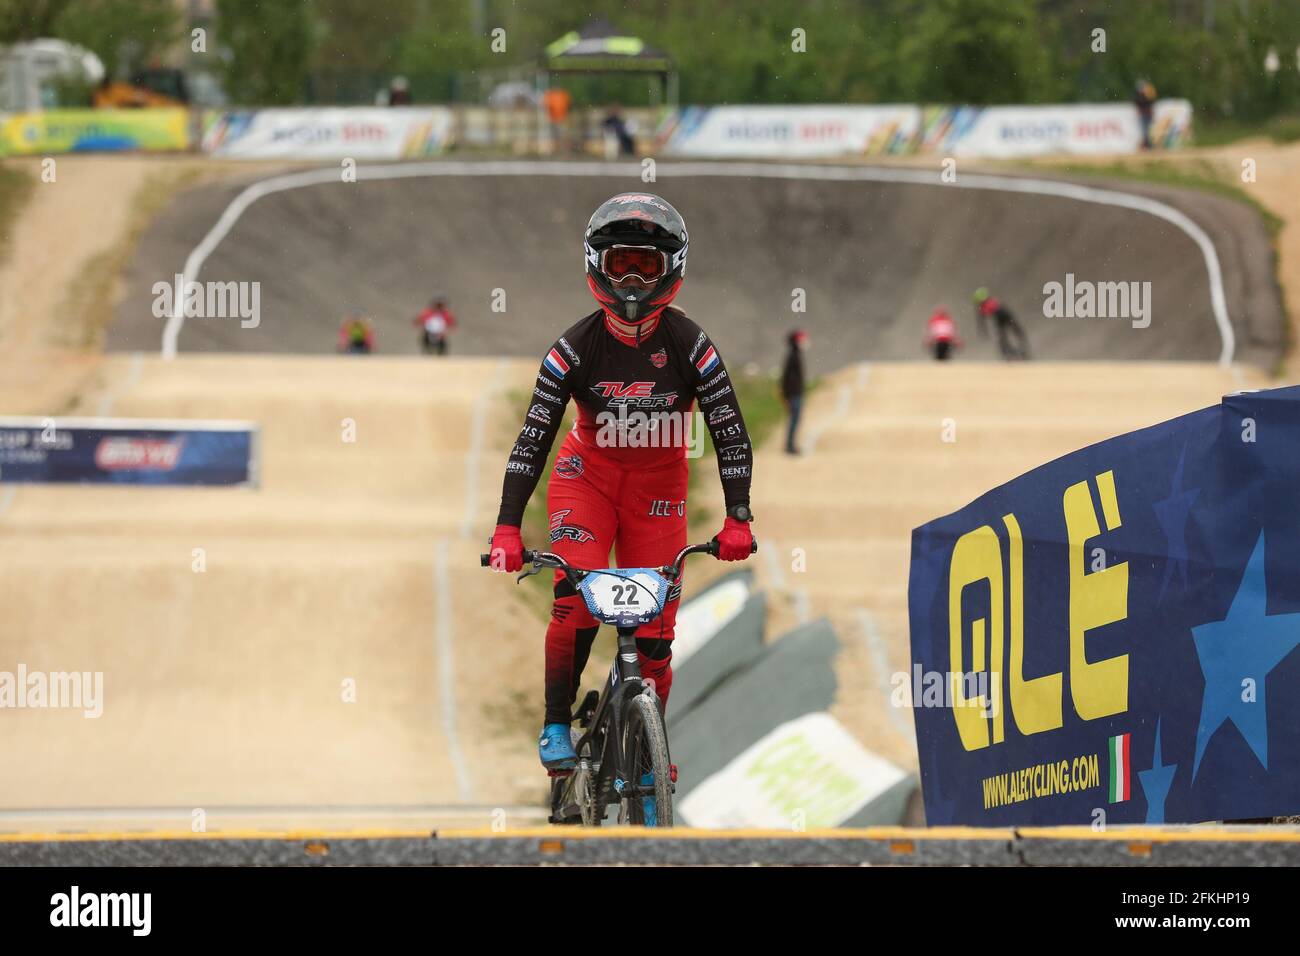 Verona, Italy. 01st May, 2021. Merel SMULDERS of Netherlands (22) competes in the BMX Racing Women Elite Round 1 of the UEC European Cup at the BMX Olympic Arena on May 1st 2021 in Verona, Italy Credit: Mickael Chavet/Alamy Live News Stock Photo